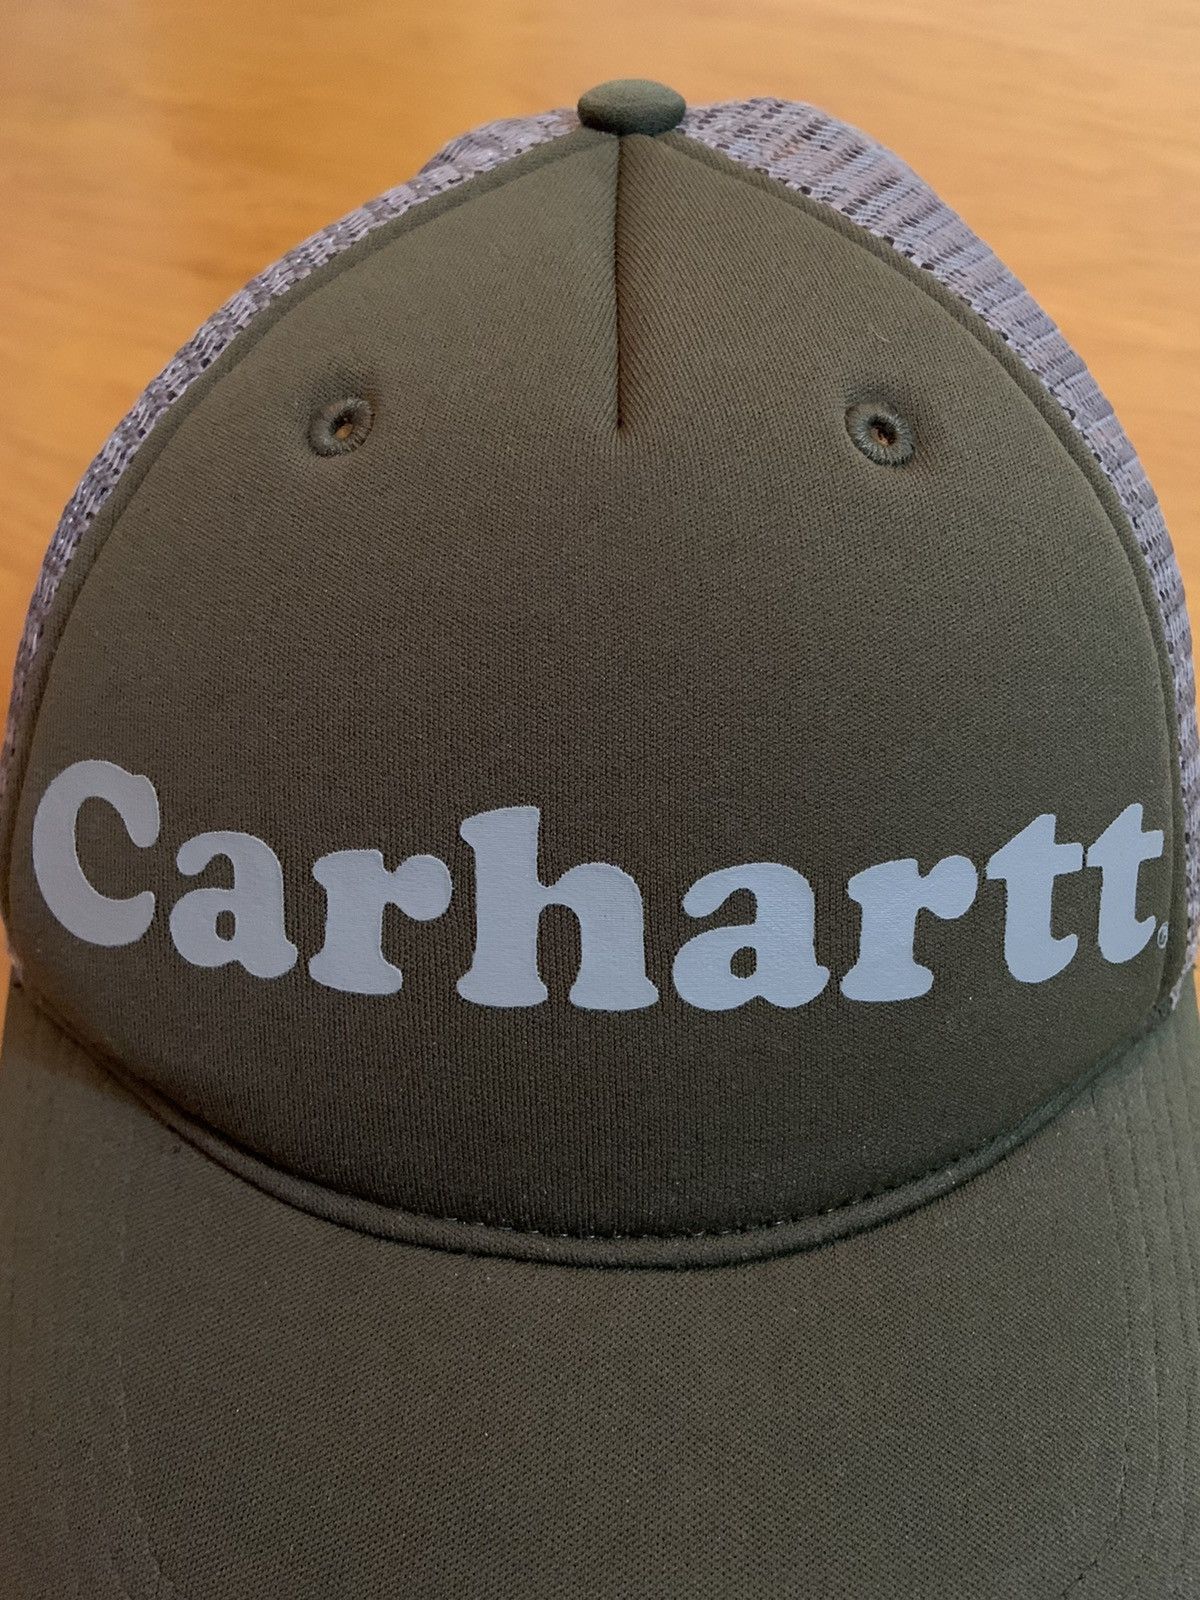 Carhartt Rare Carhartt Spell Out Trucker Hat Low Profile Size ONE SIZE - 3 Thumbnail